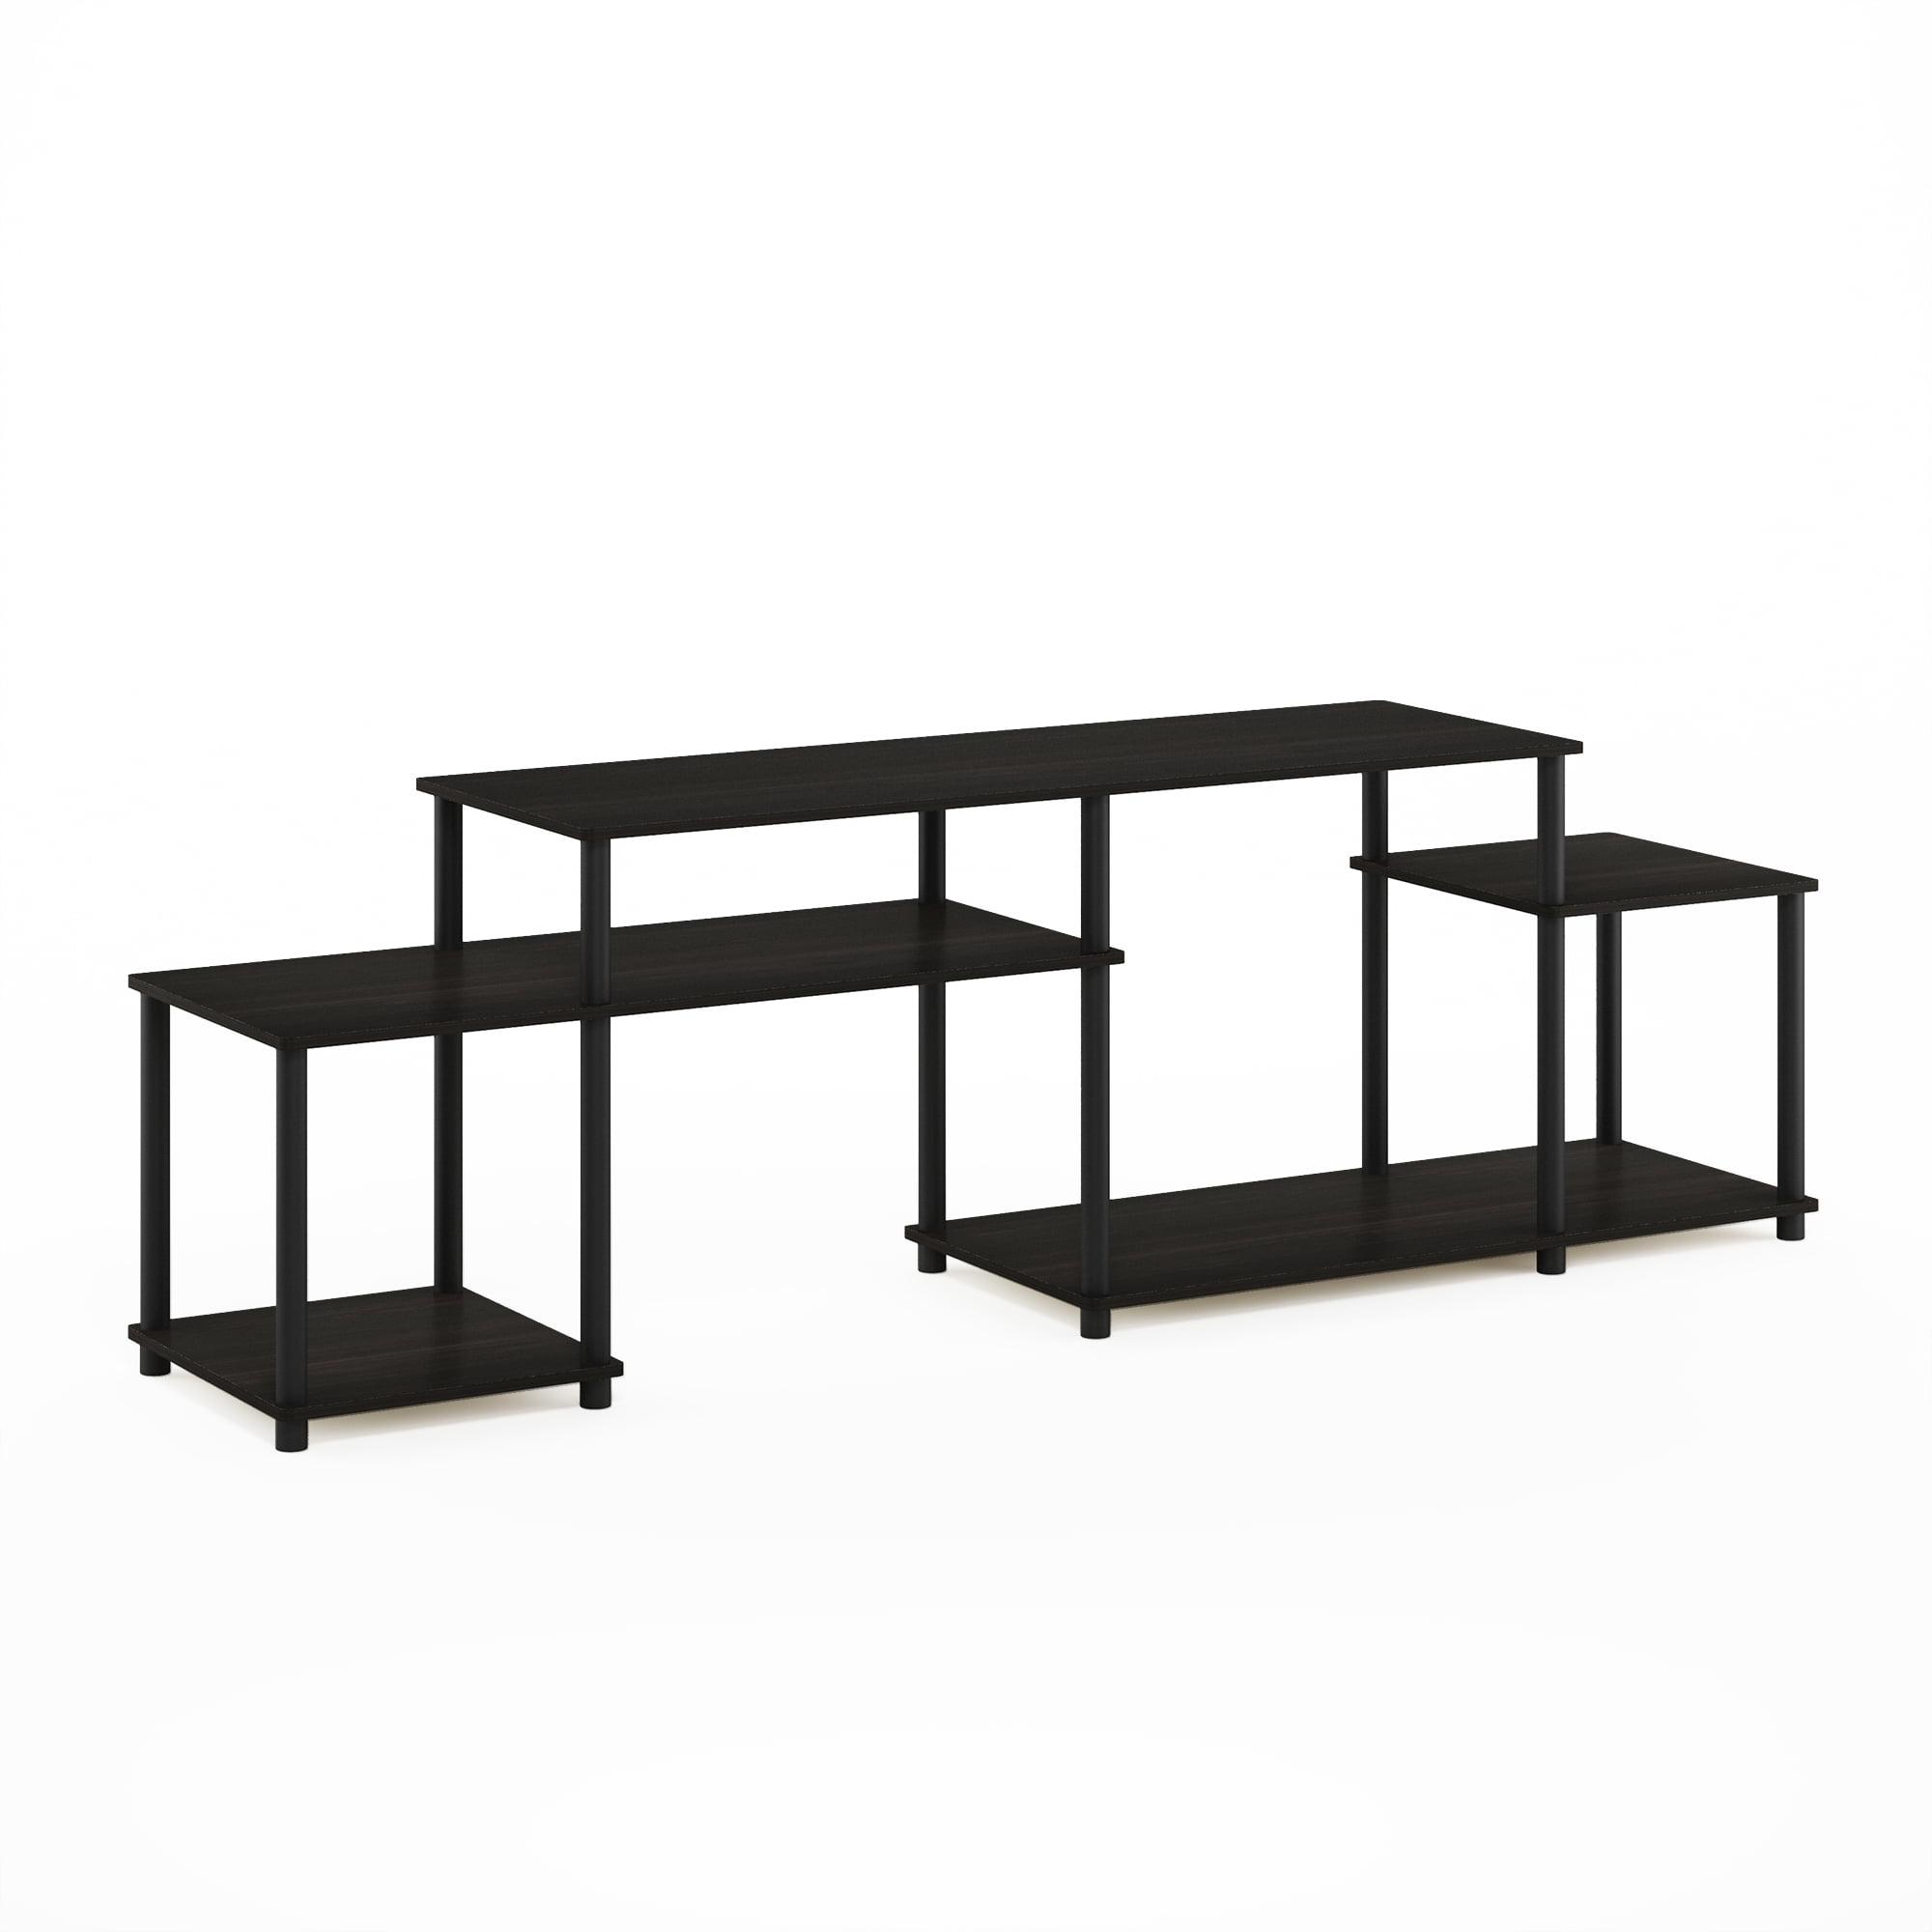 Espresso and Black Composite Wood TV Stand for 55 Inch Screen